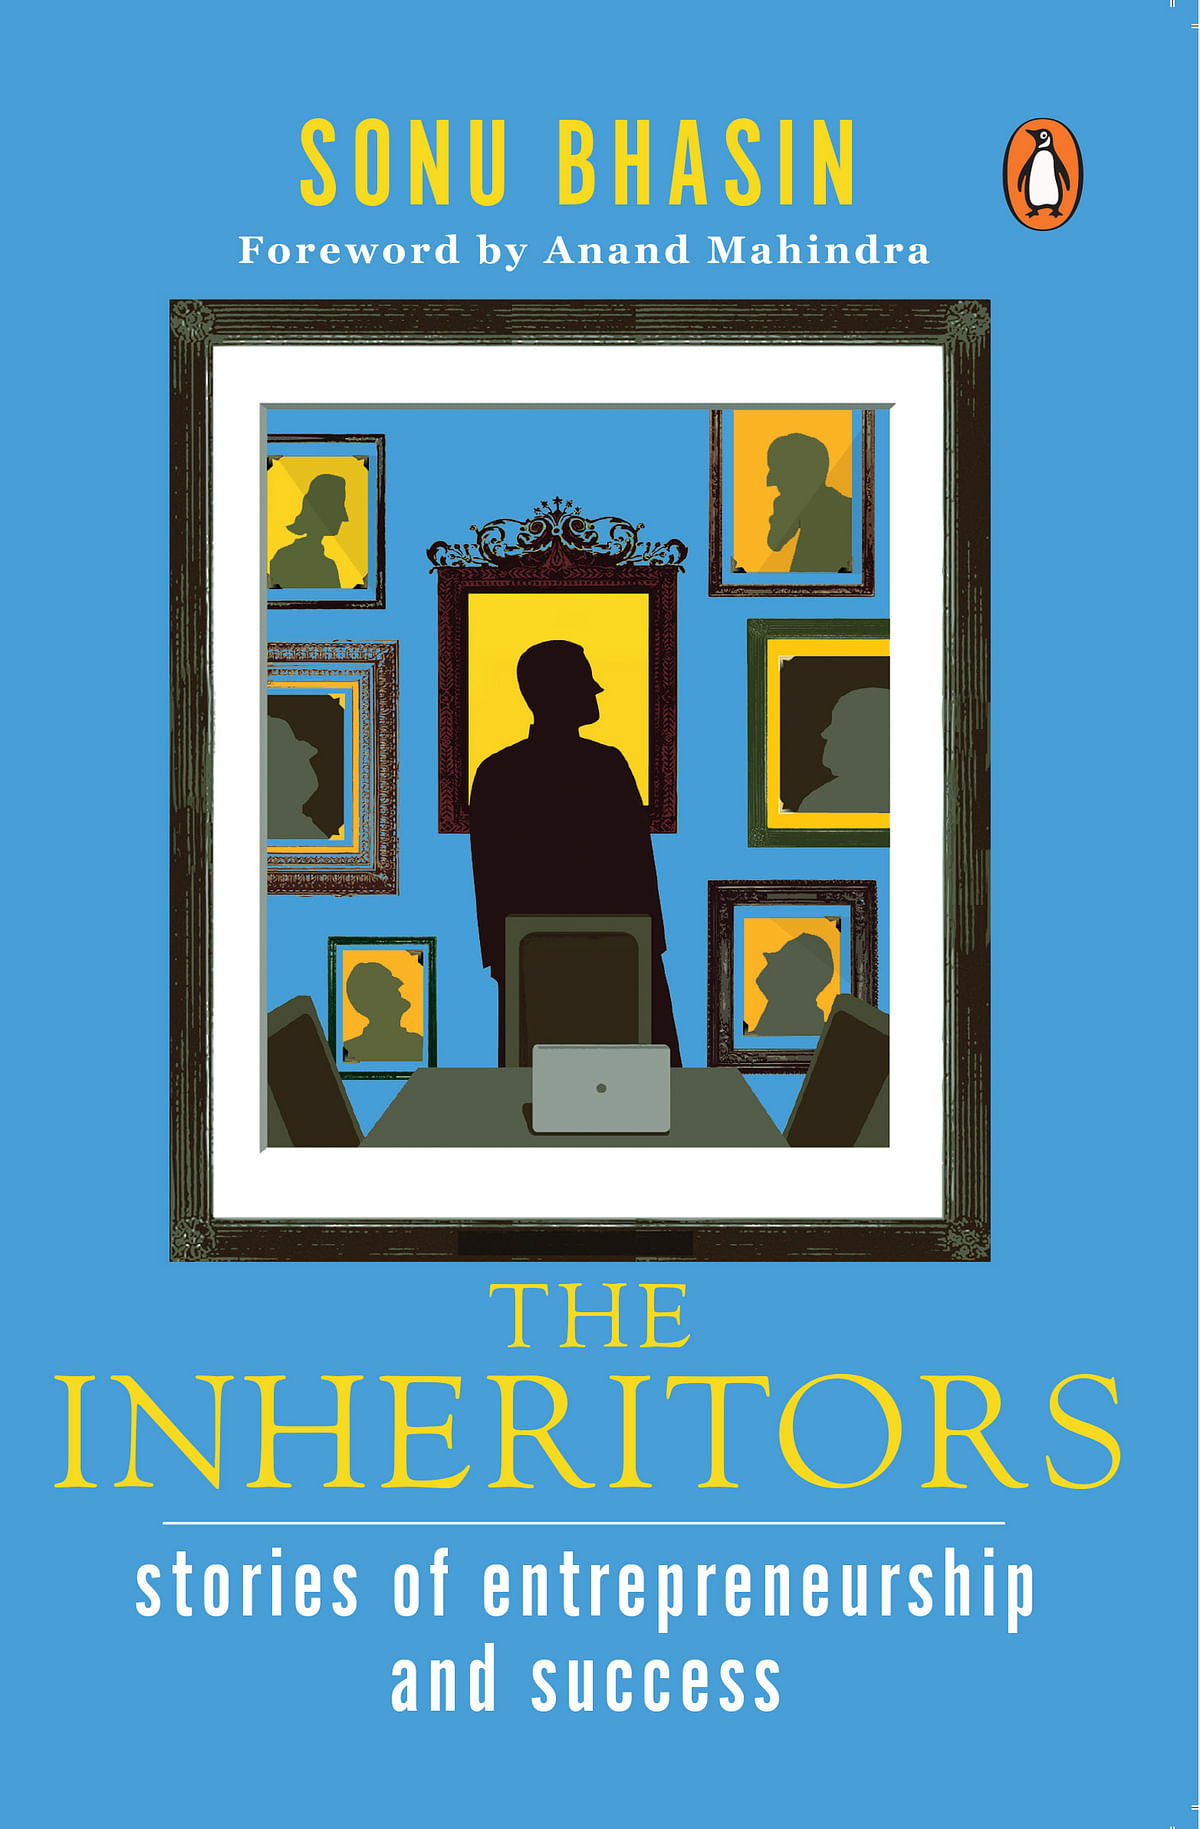 From family business to global footprint, ‘The Inheritors’ tells the story of successful Indian entrepreneurs.